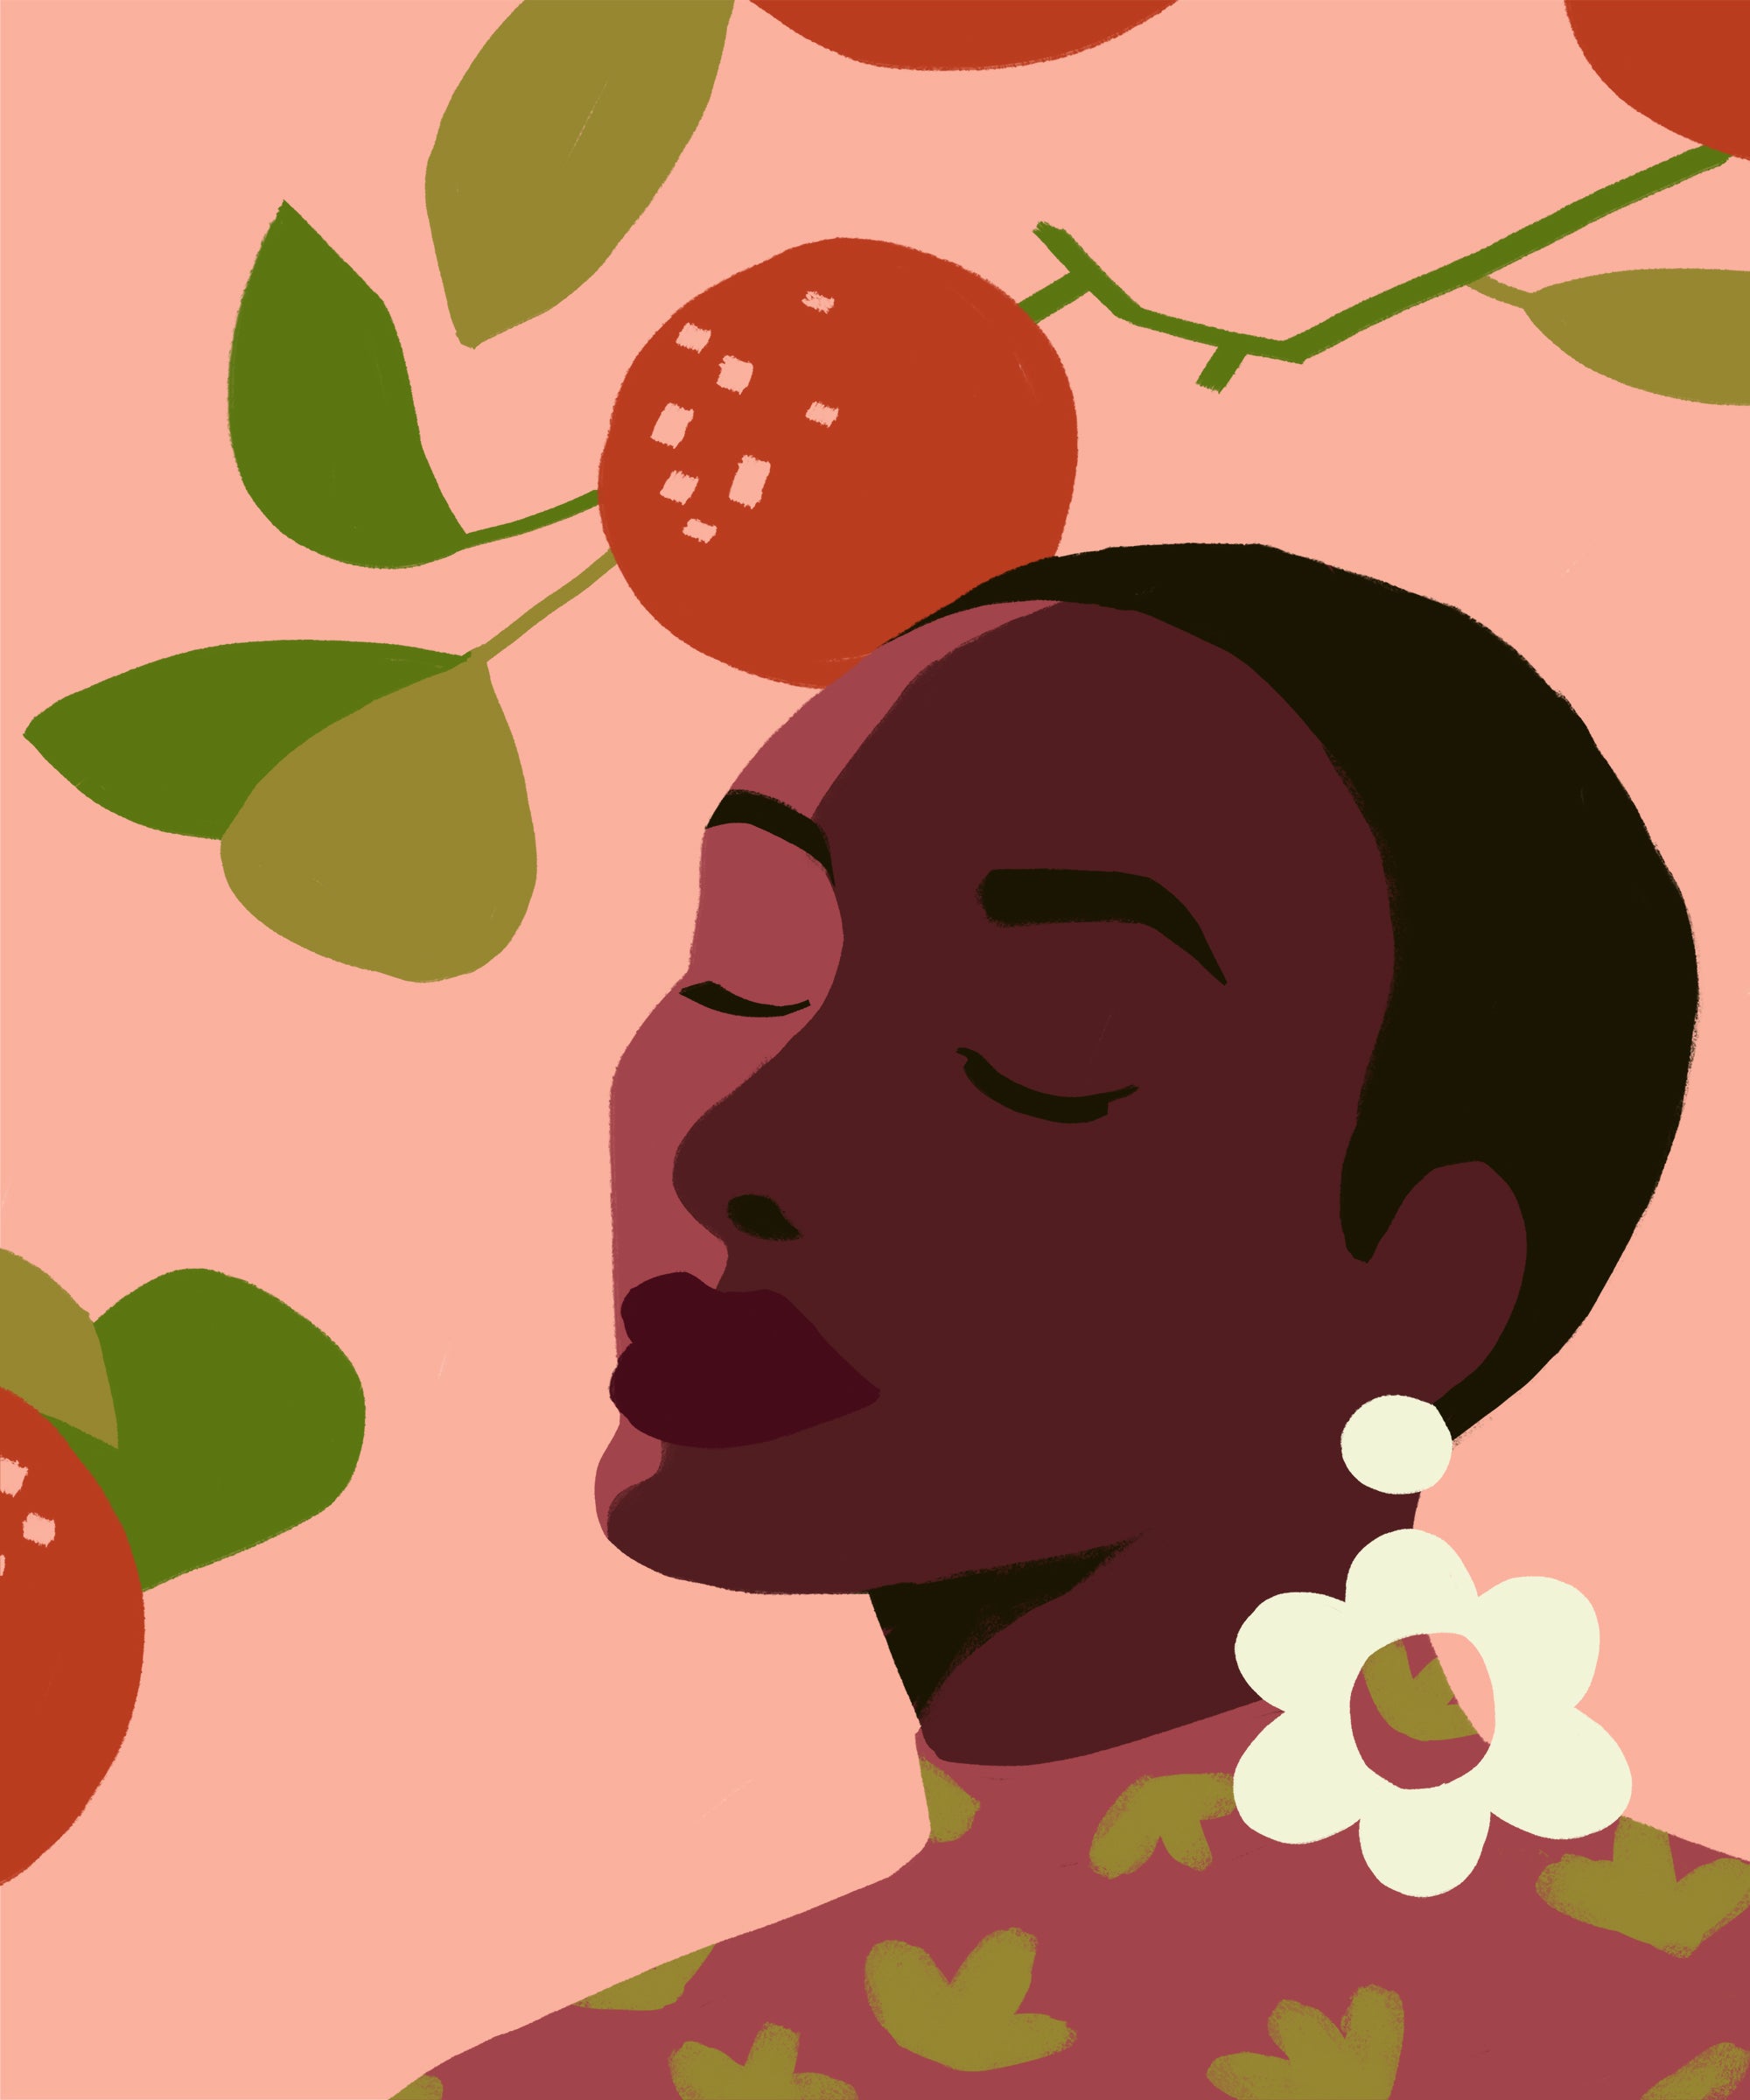 From Vitamin C To AHA: 5 Key Ingredients To Rejuvenate Your Skin